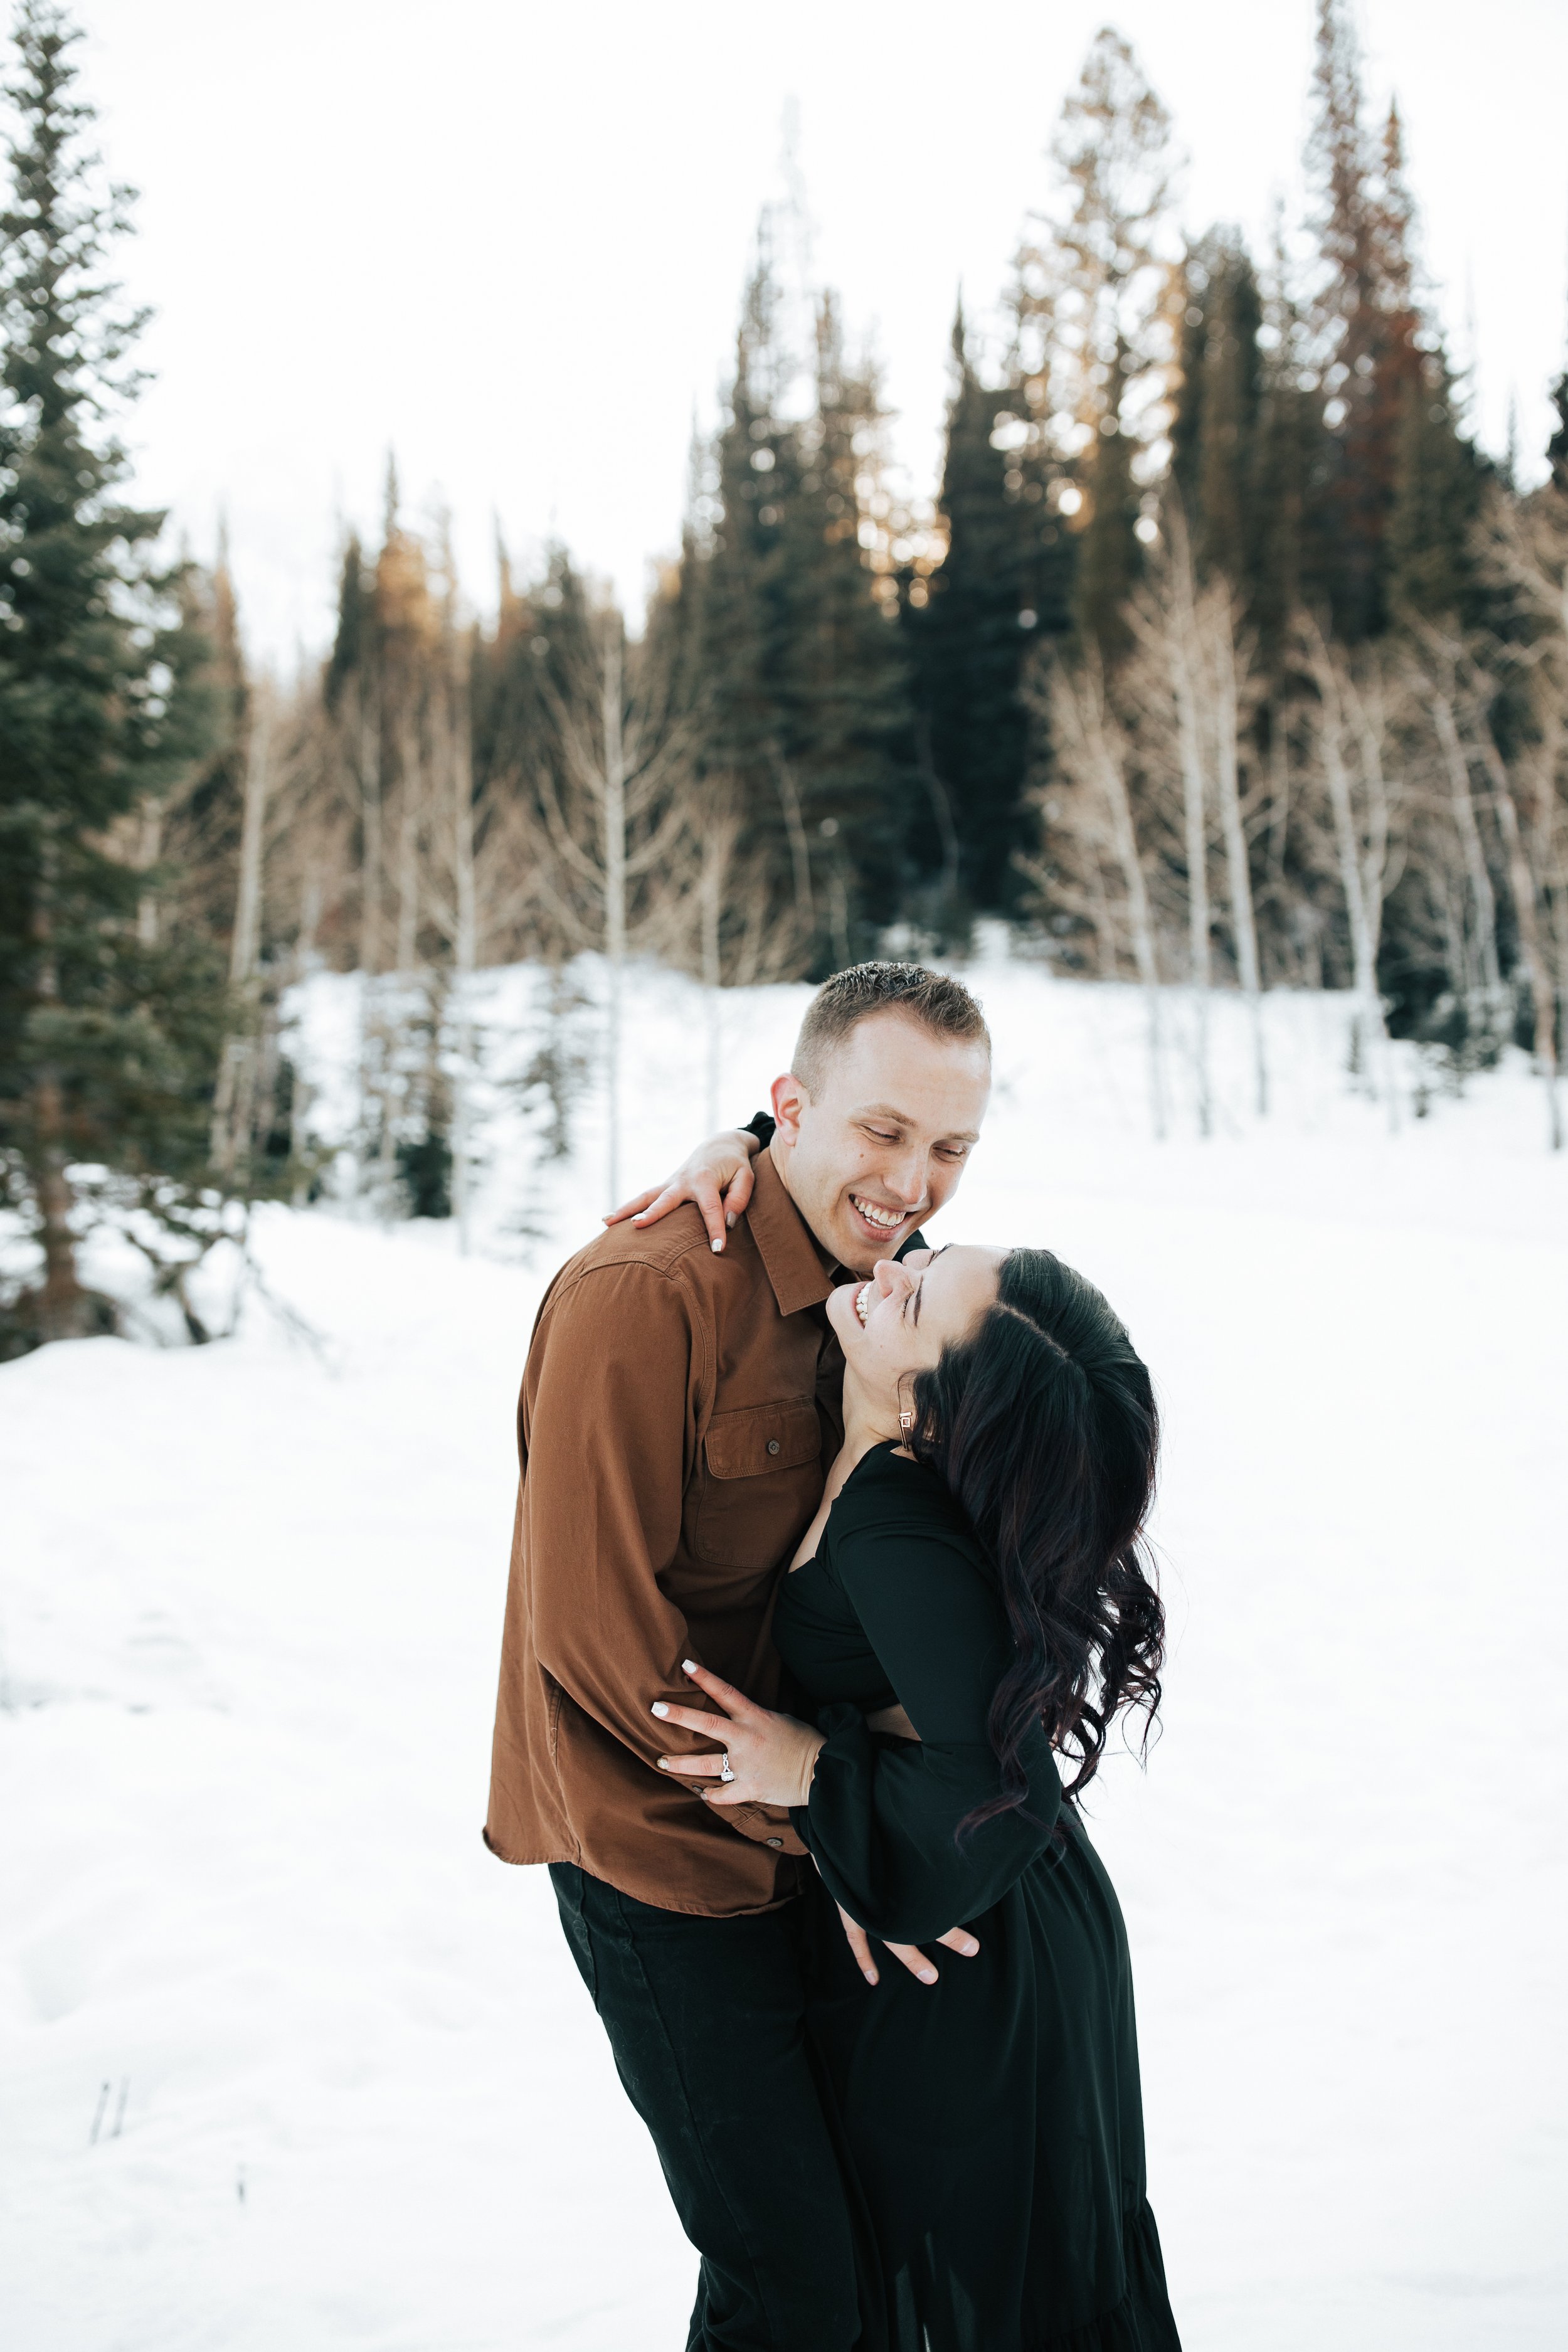  Winter photoshoot outfit inspo. Man and woman kiss in the snowy mountains wearing coats and beanies. Utah mountain engagement shoot in the winter. Park City, Utah photographer. #winter #engagements #engagementsession #utahphotoshoot #utahengagements